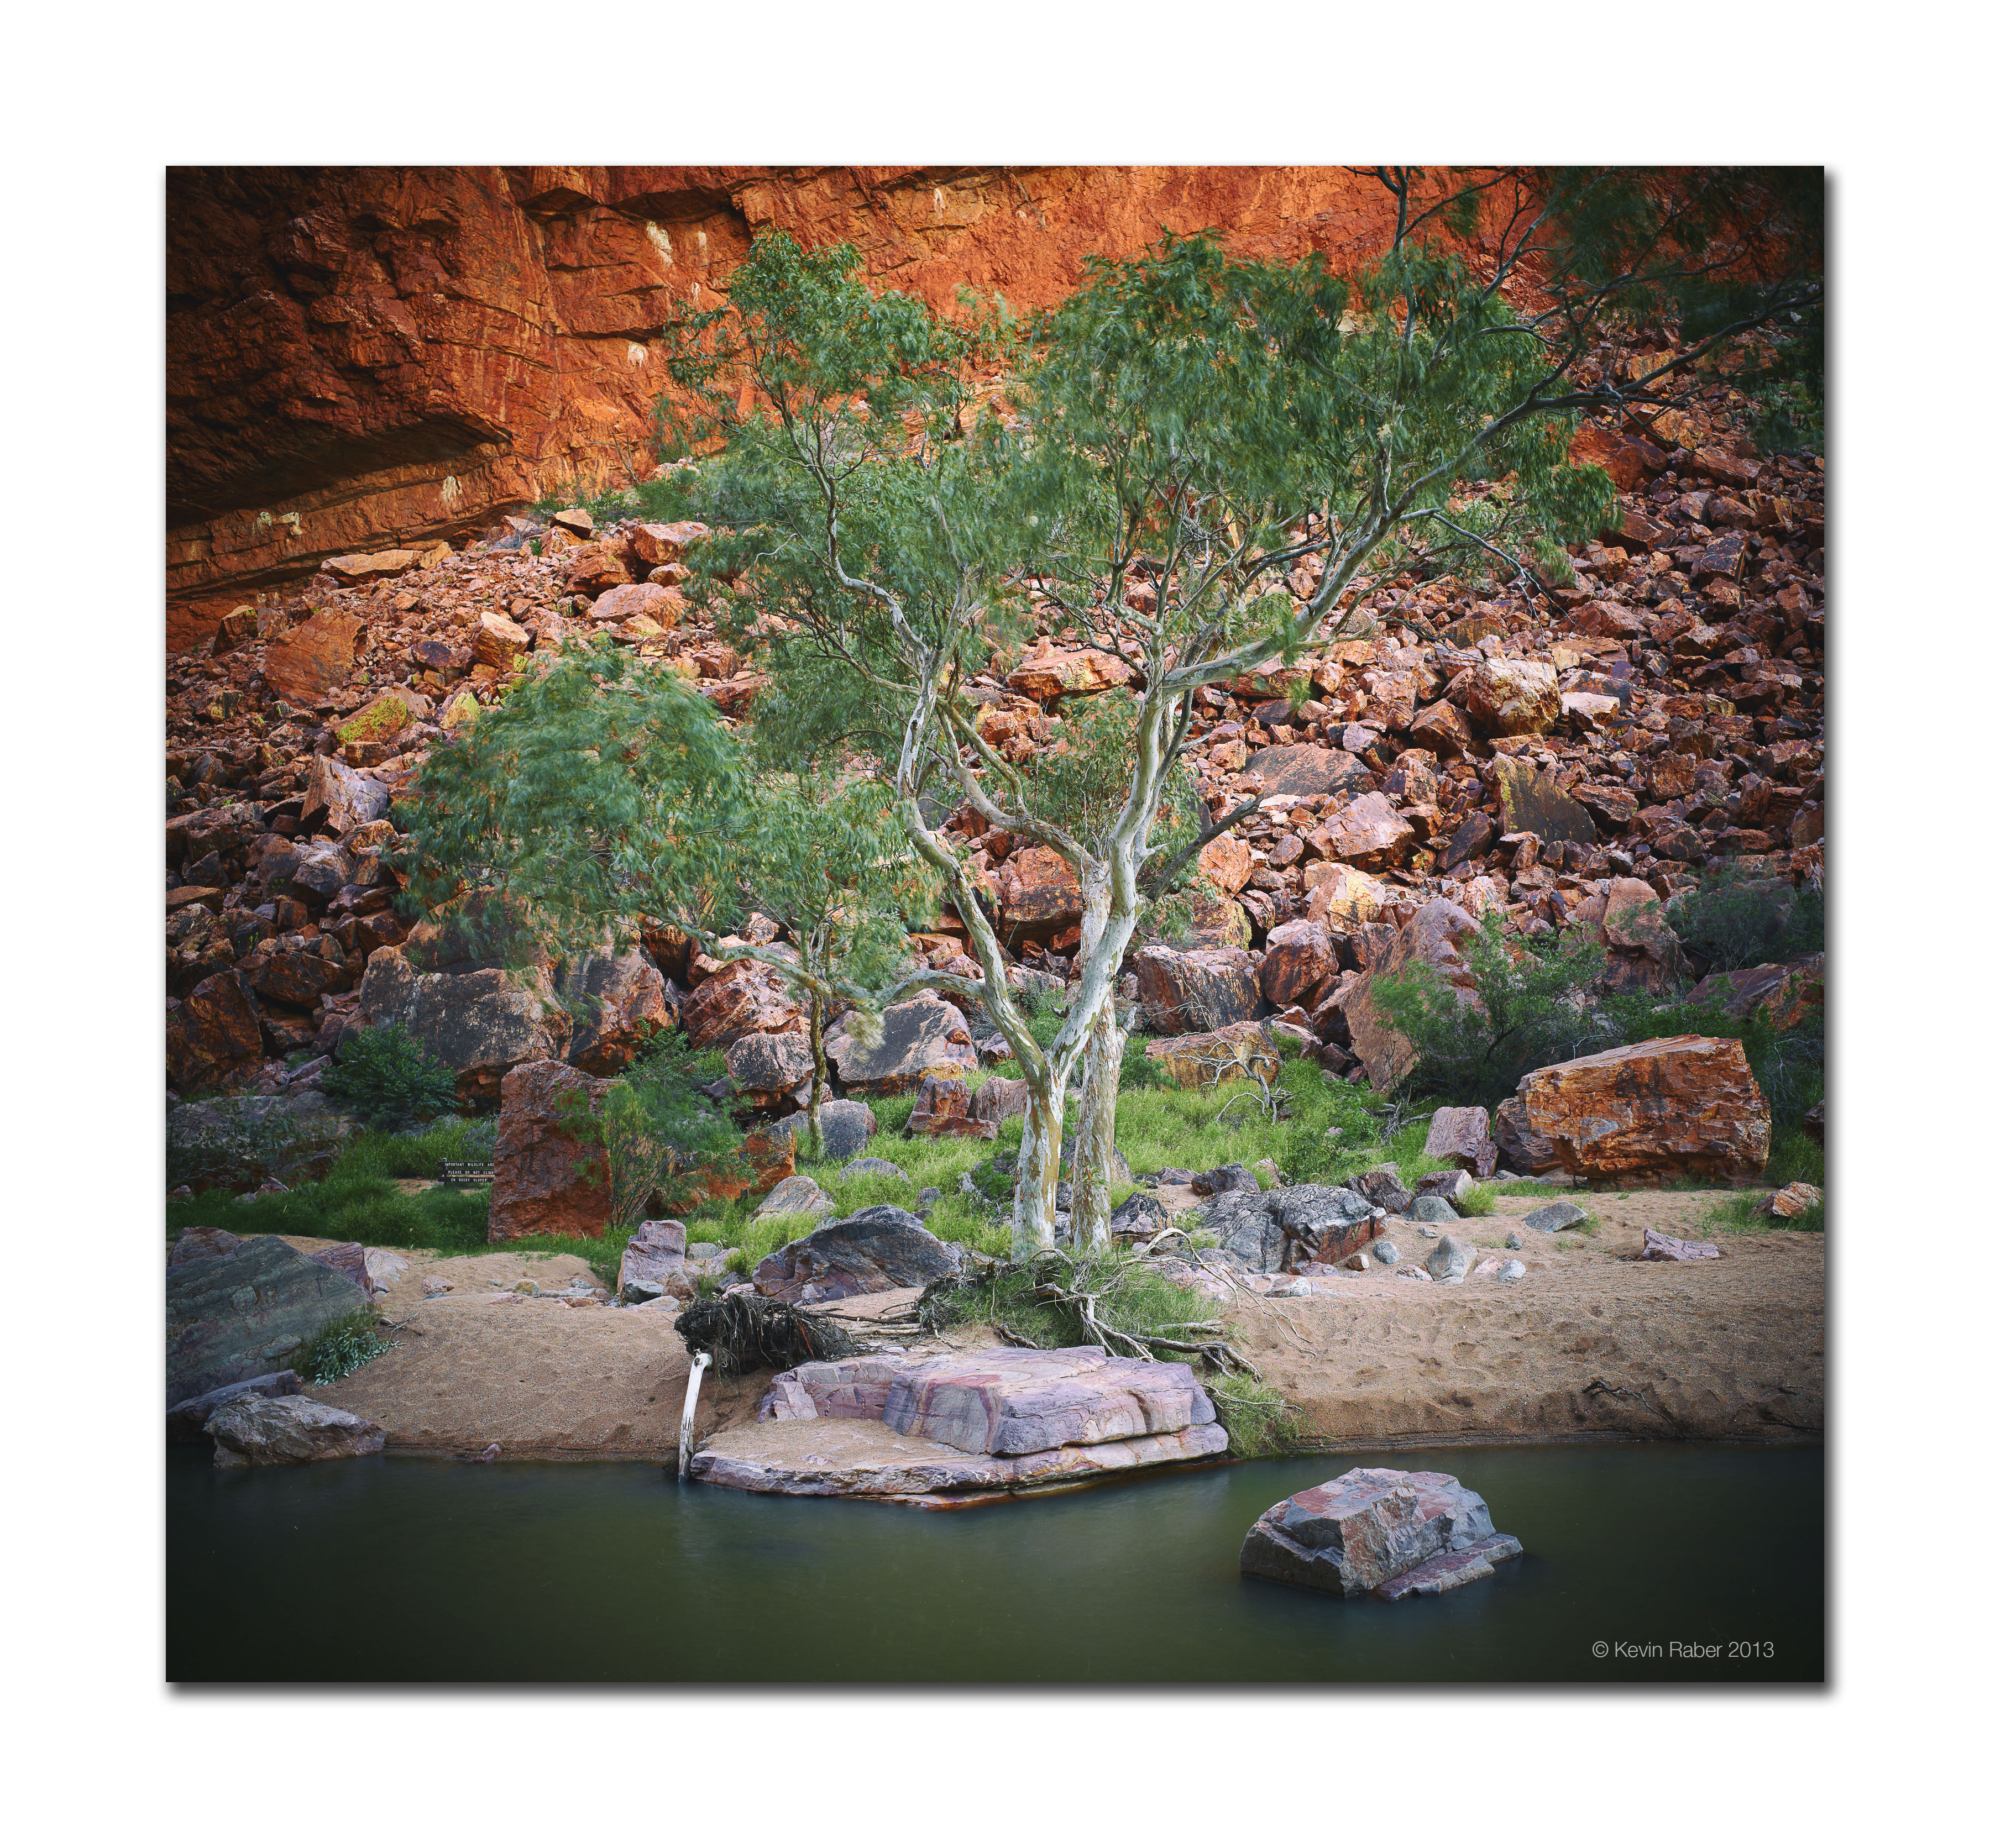 One of many gorges in Central Australia